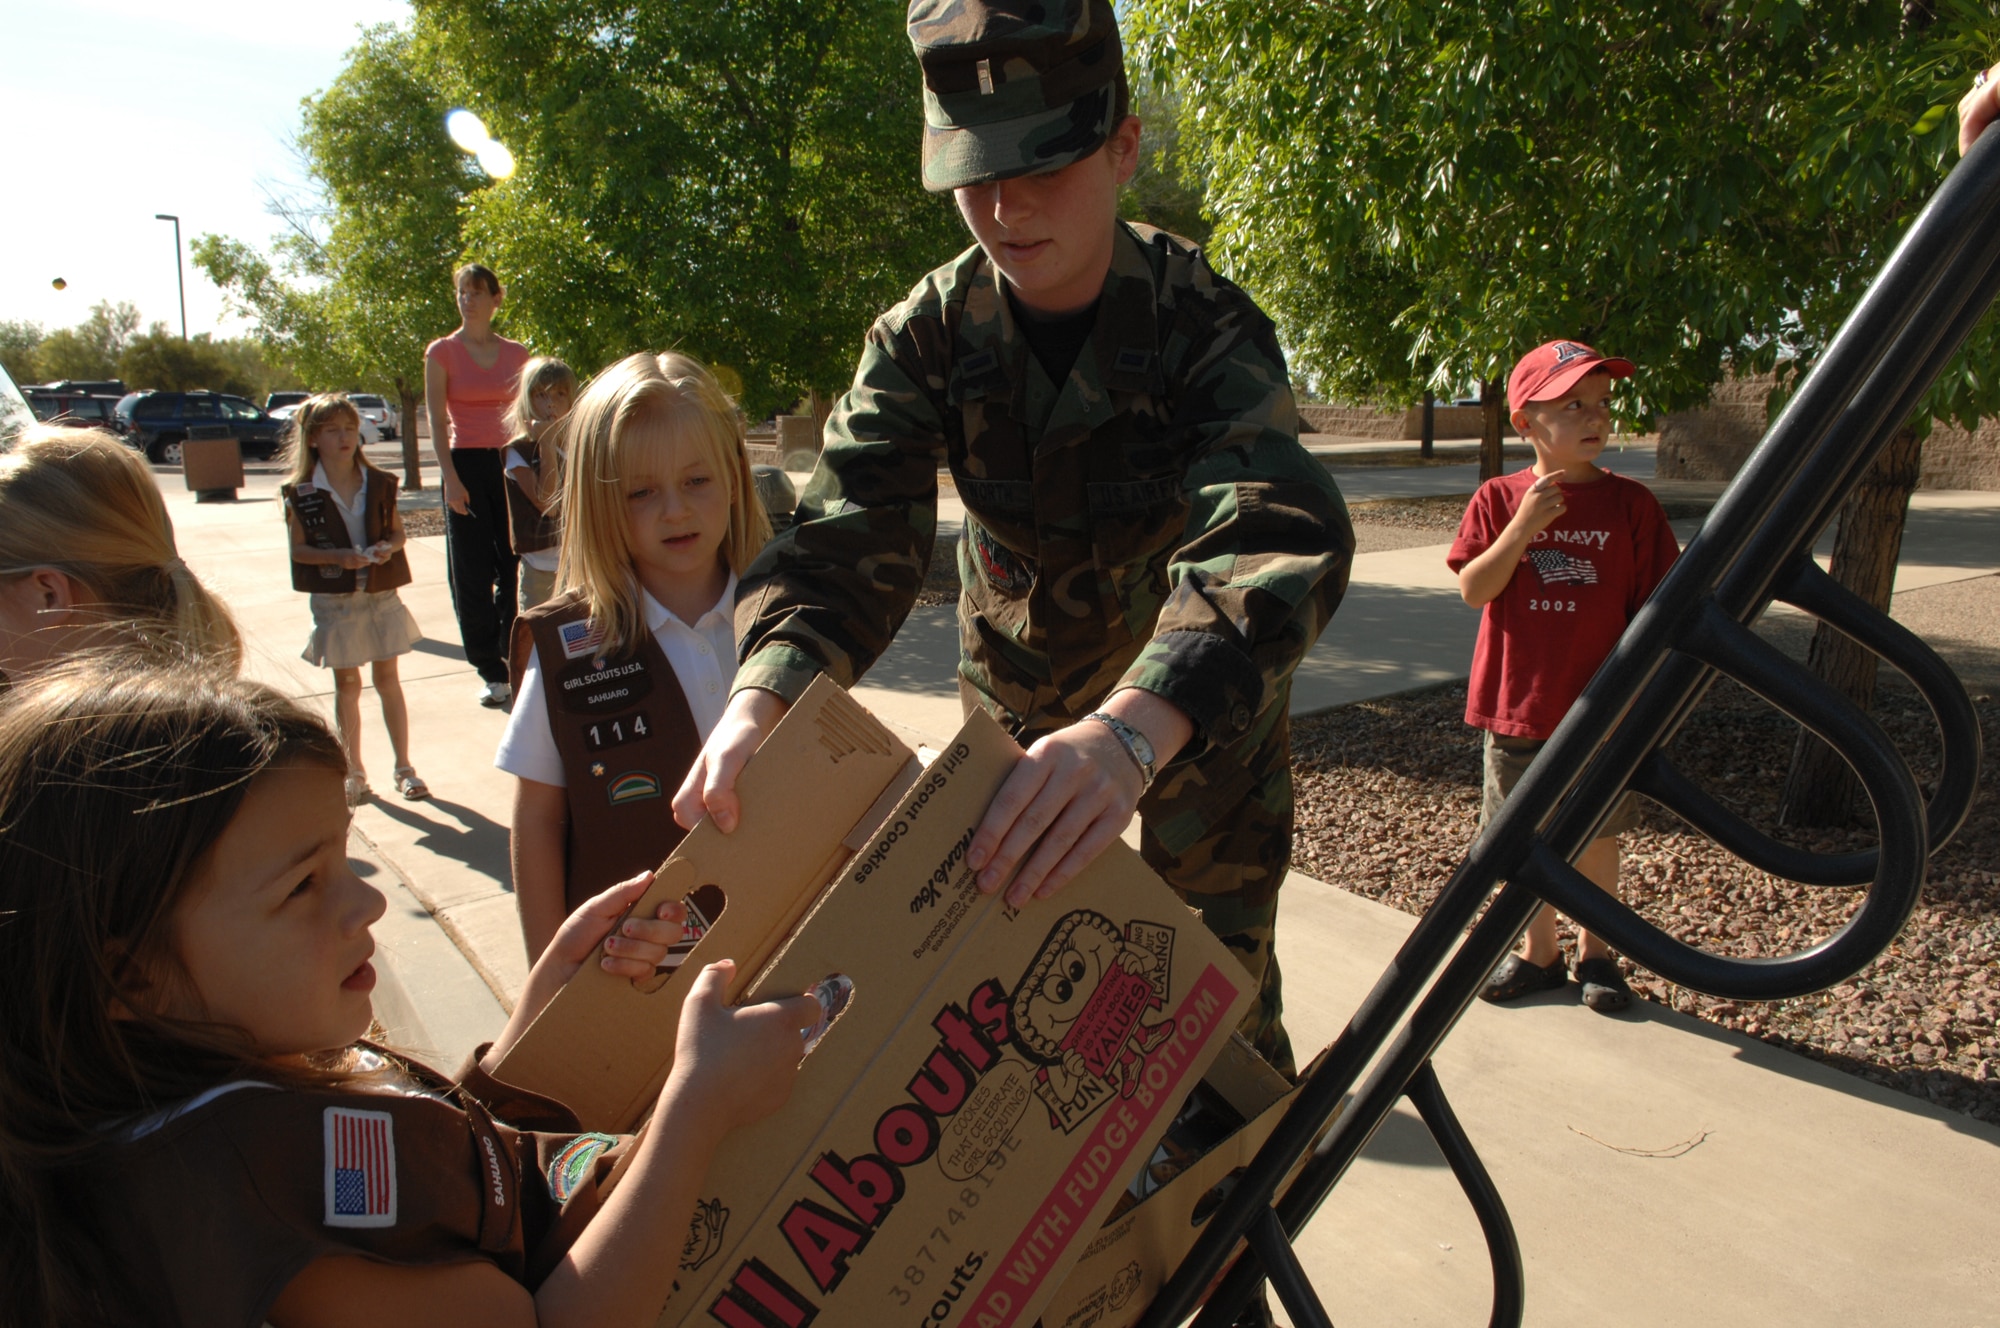 Brownie troop #114 help 1Lt. Rose Killingsworth, 474th Operations Group, unload just part of a total of 250 boxes of Girl Scout cookies donated by the Girl Scouts of the USA, Old Vail Service Unit, at Headquarters Twelfth Air Force, April 4.  The cookies will be delivered by Twelfth Air Force and Air Forces Southern to deployed Airmen as well as various orphanages and organizations in the Air Forces Southern Area of responsibility, which includes Central and South America and the Caribbean. 